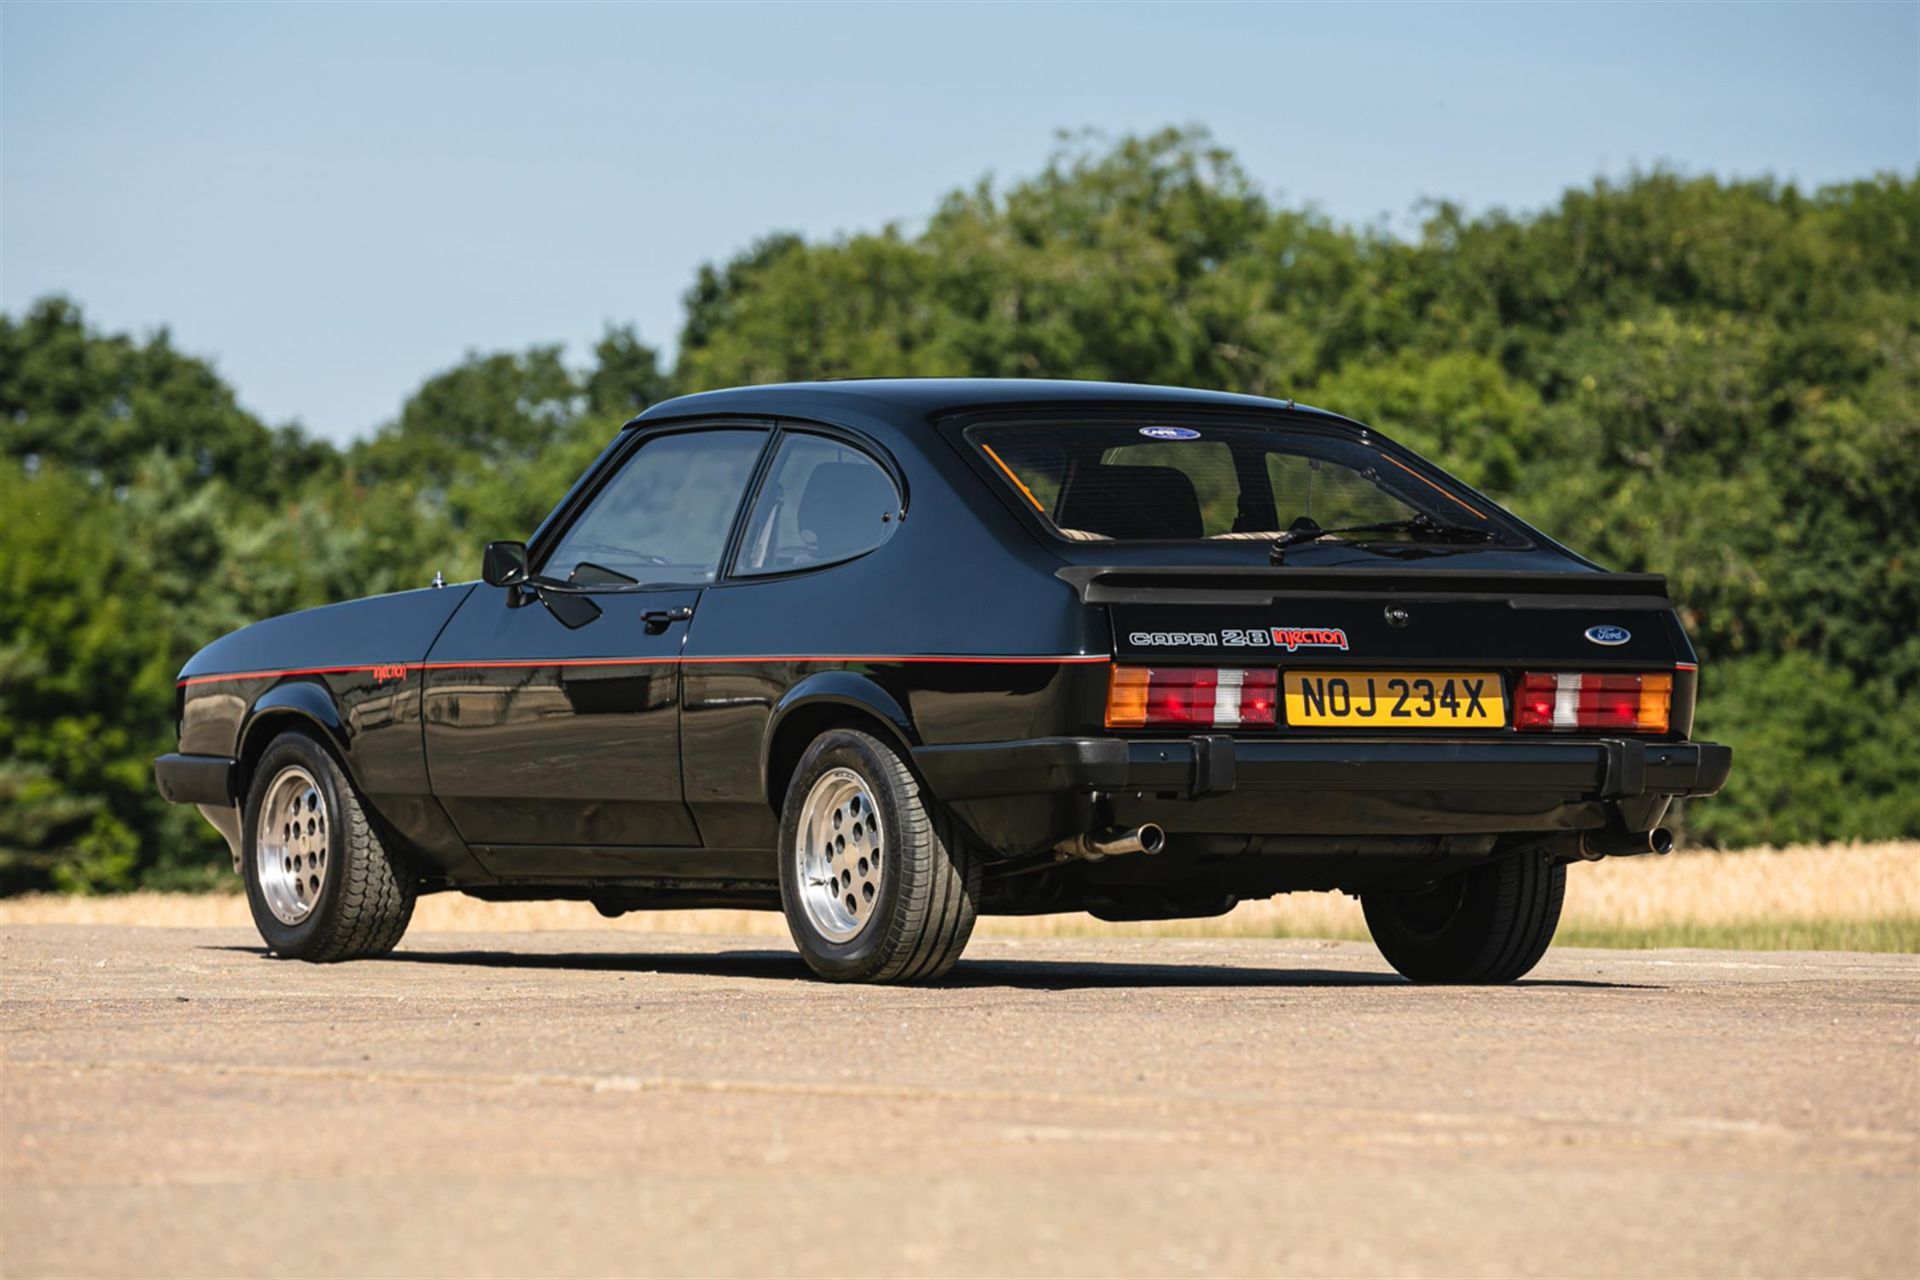 1982 Ford Capri 2.8-Litre injection (Ex-Alfie Moon, BBC EastEnders) - Image 4 of 10